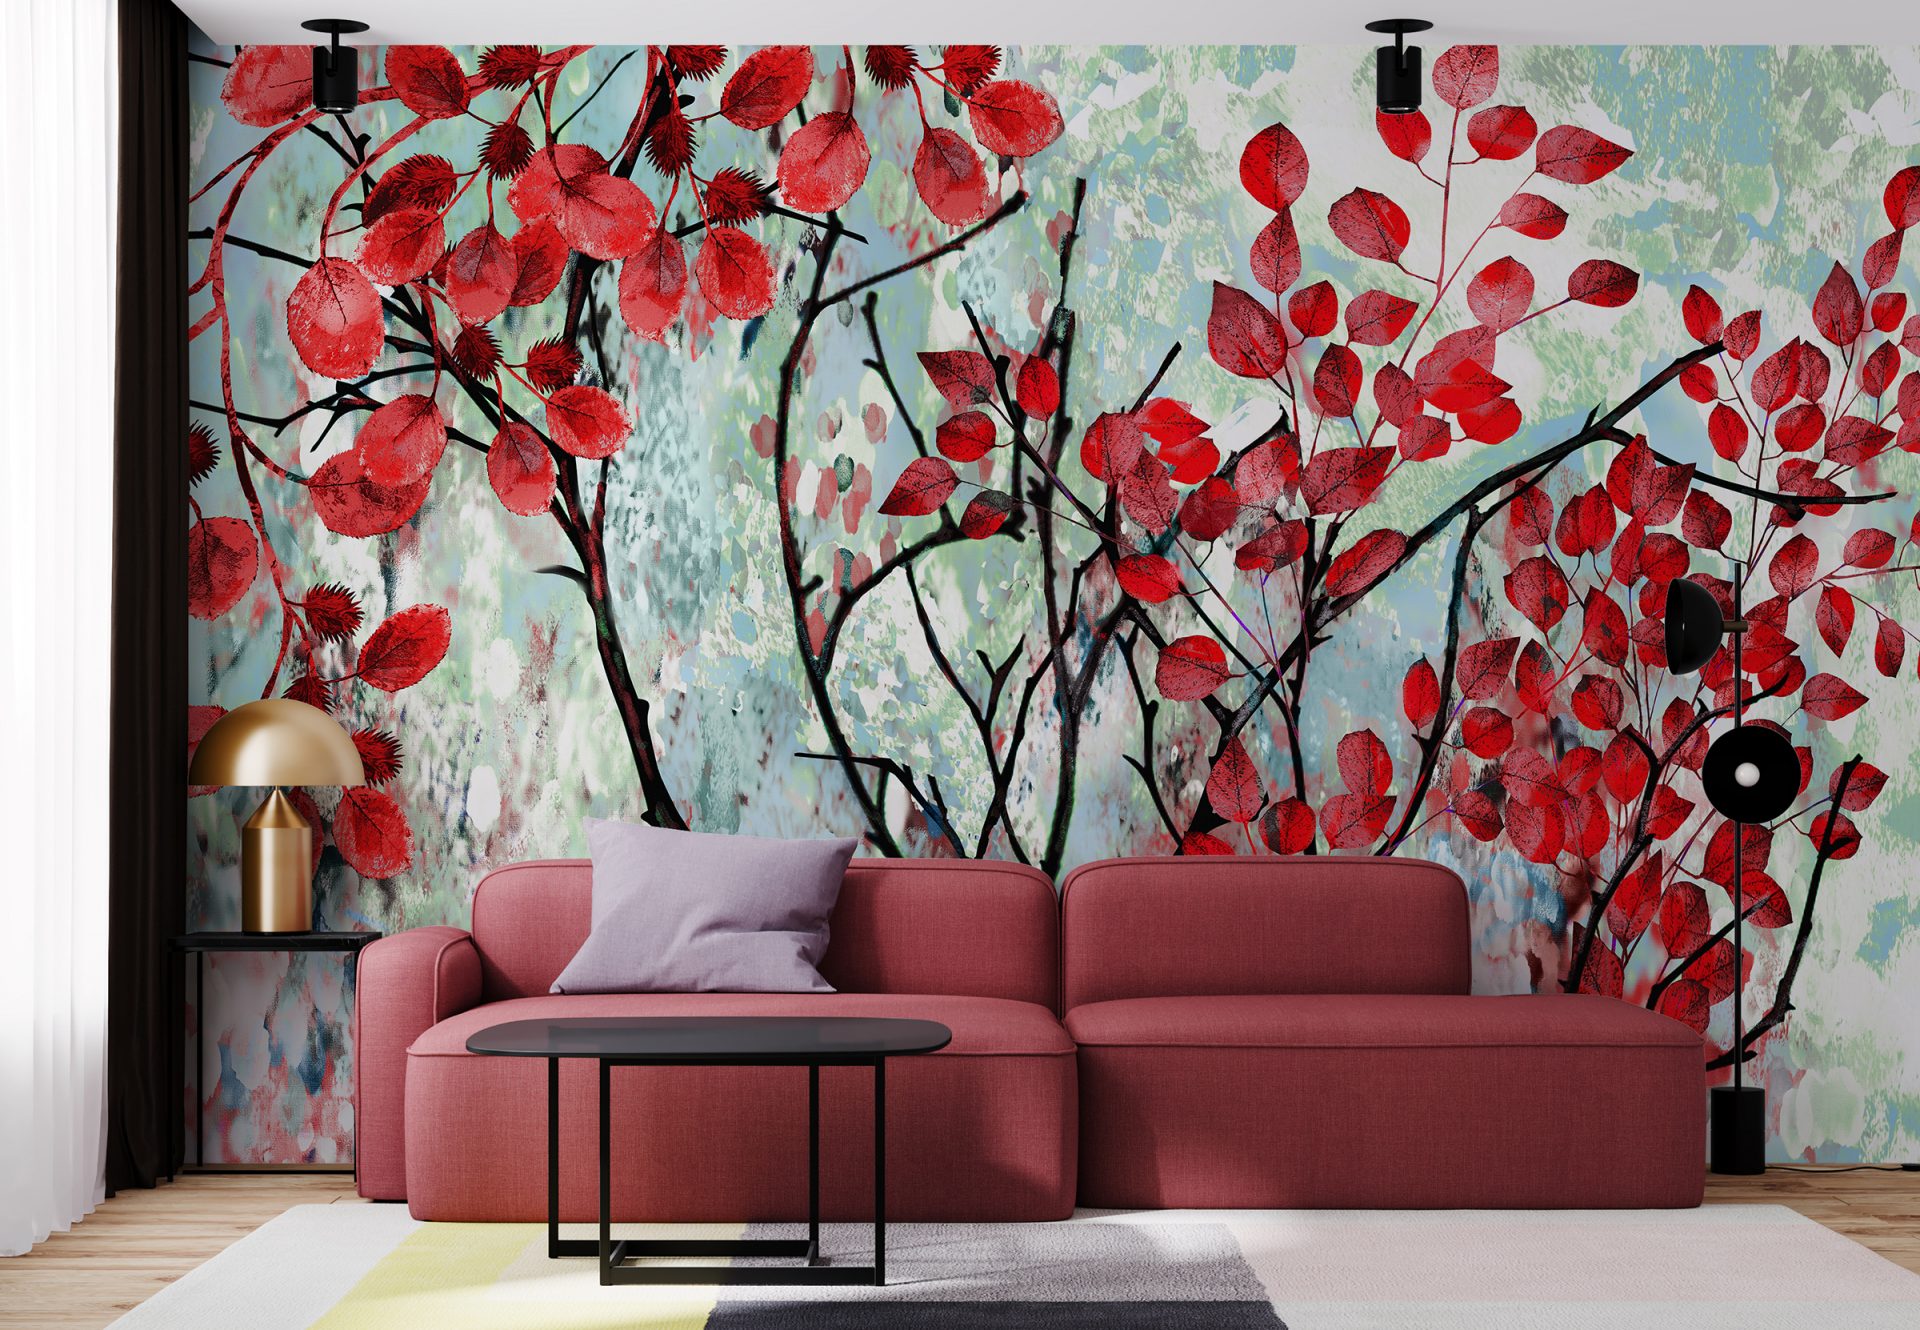 Custom wallpaper for your walls: How to choose ?